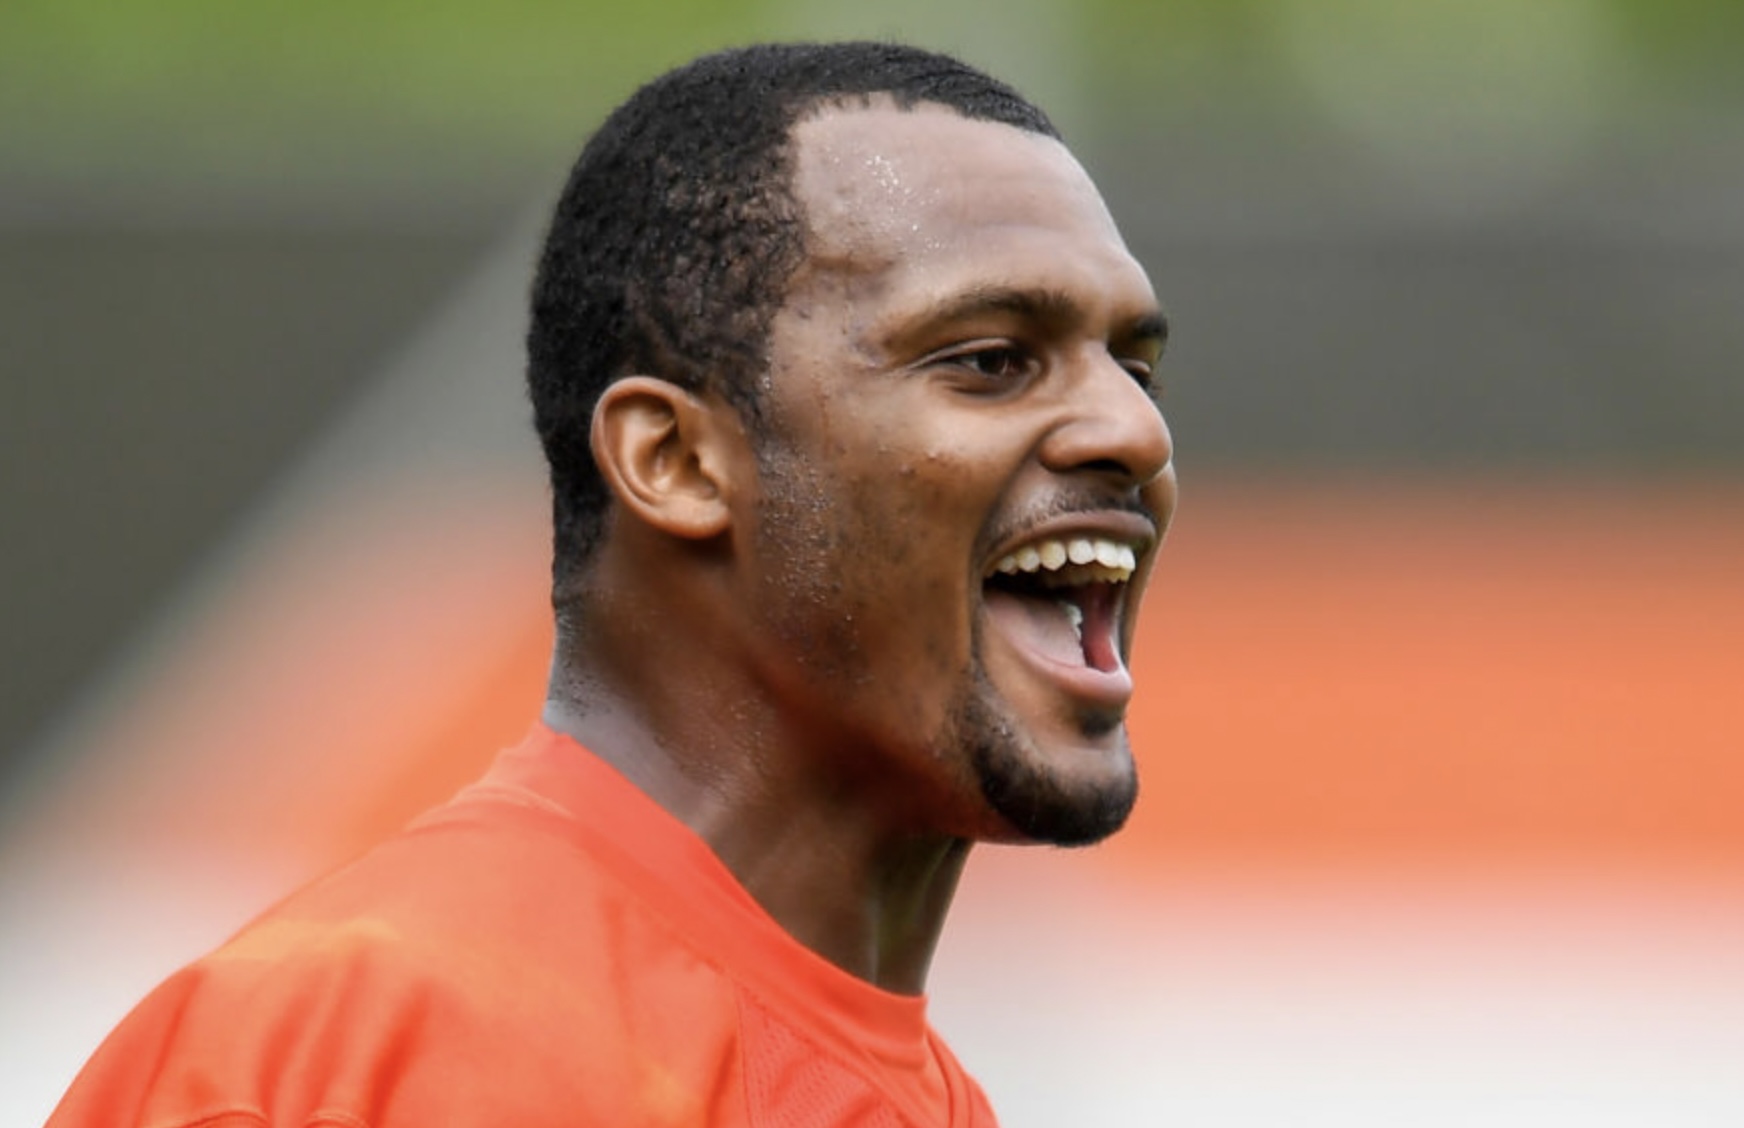 Deshaun Watson Releases Text Messages From Massage Therapist Saying She Gives Best Oral Relations in Houston